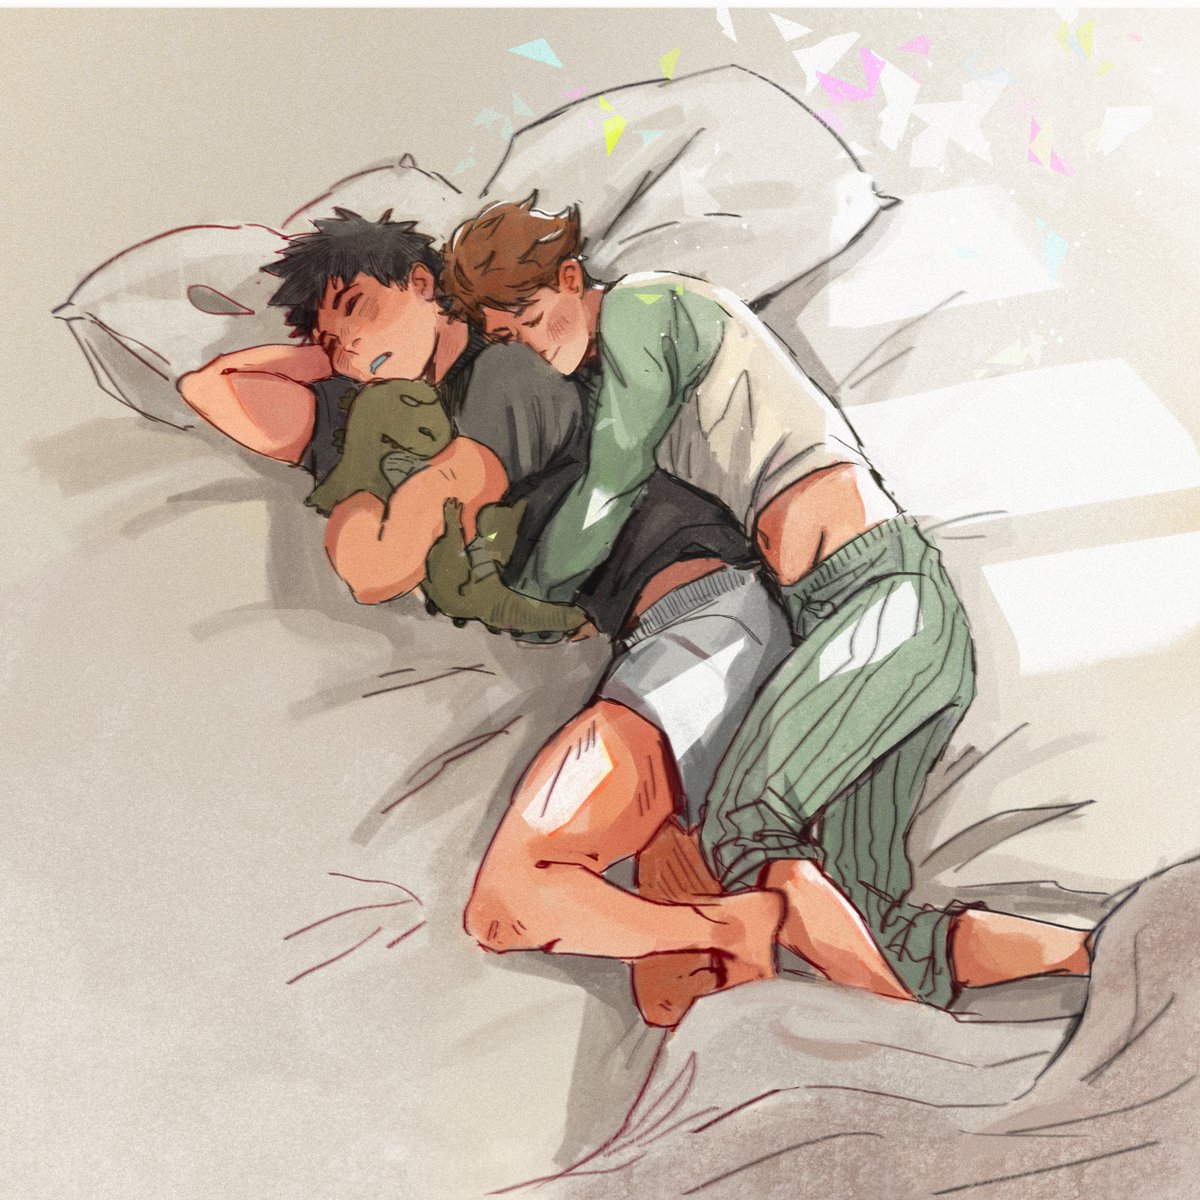 iwaoi snuggles for @/12helianthus